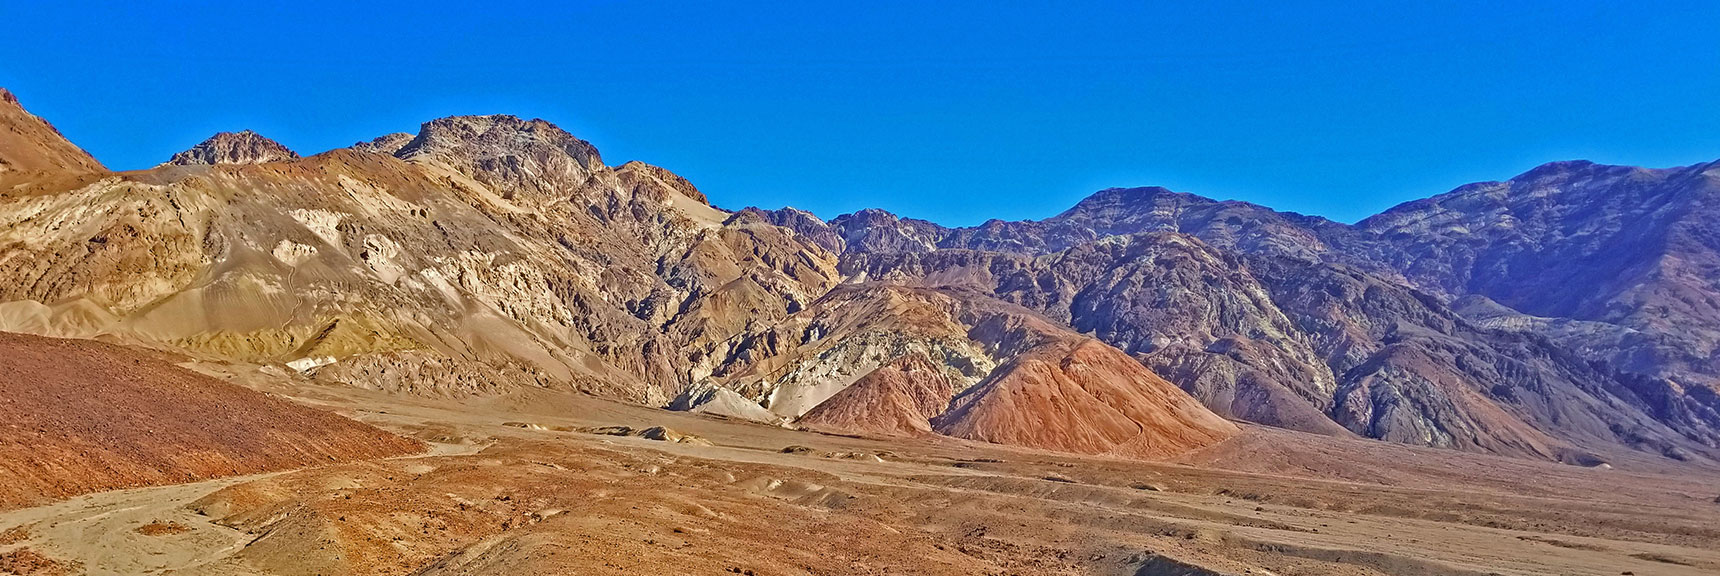 Colorful Hills Along Artist Drive from High Ridge Hike Perspective | Artists Drive Hidden Canyon Hikes | Death Valley National Park, California